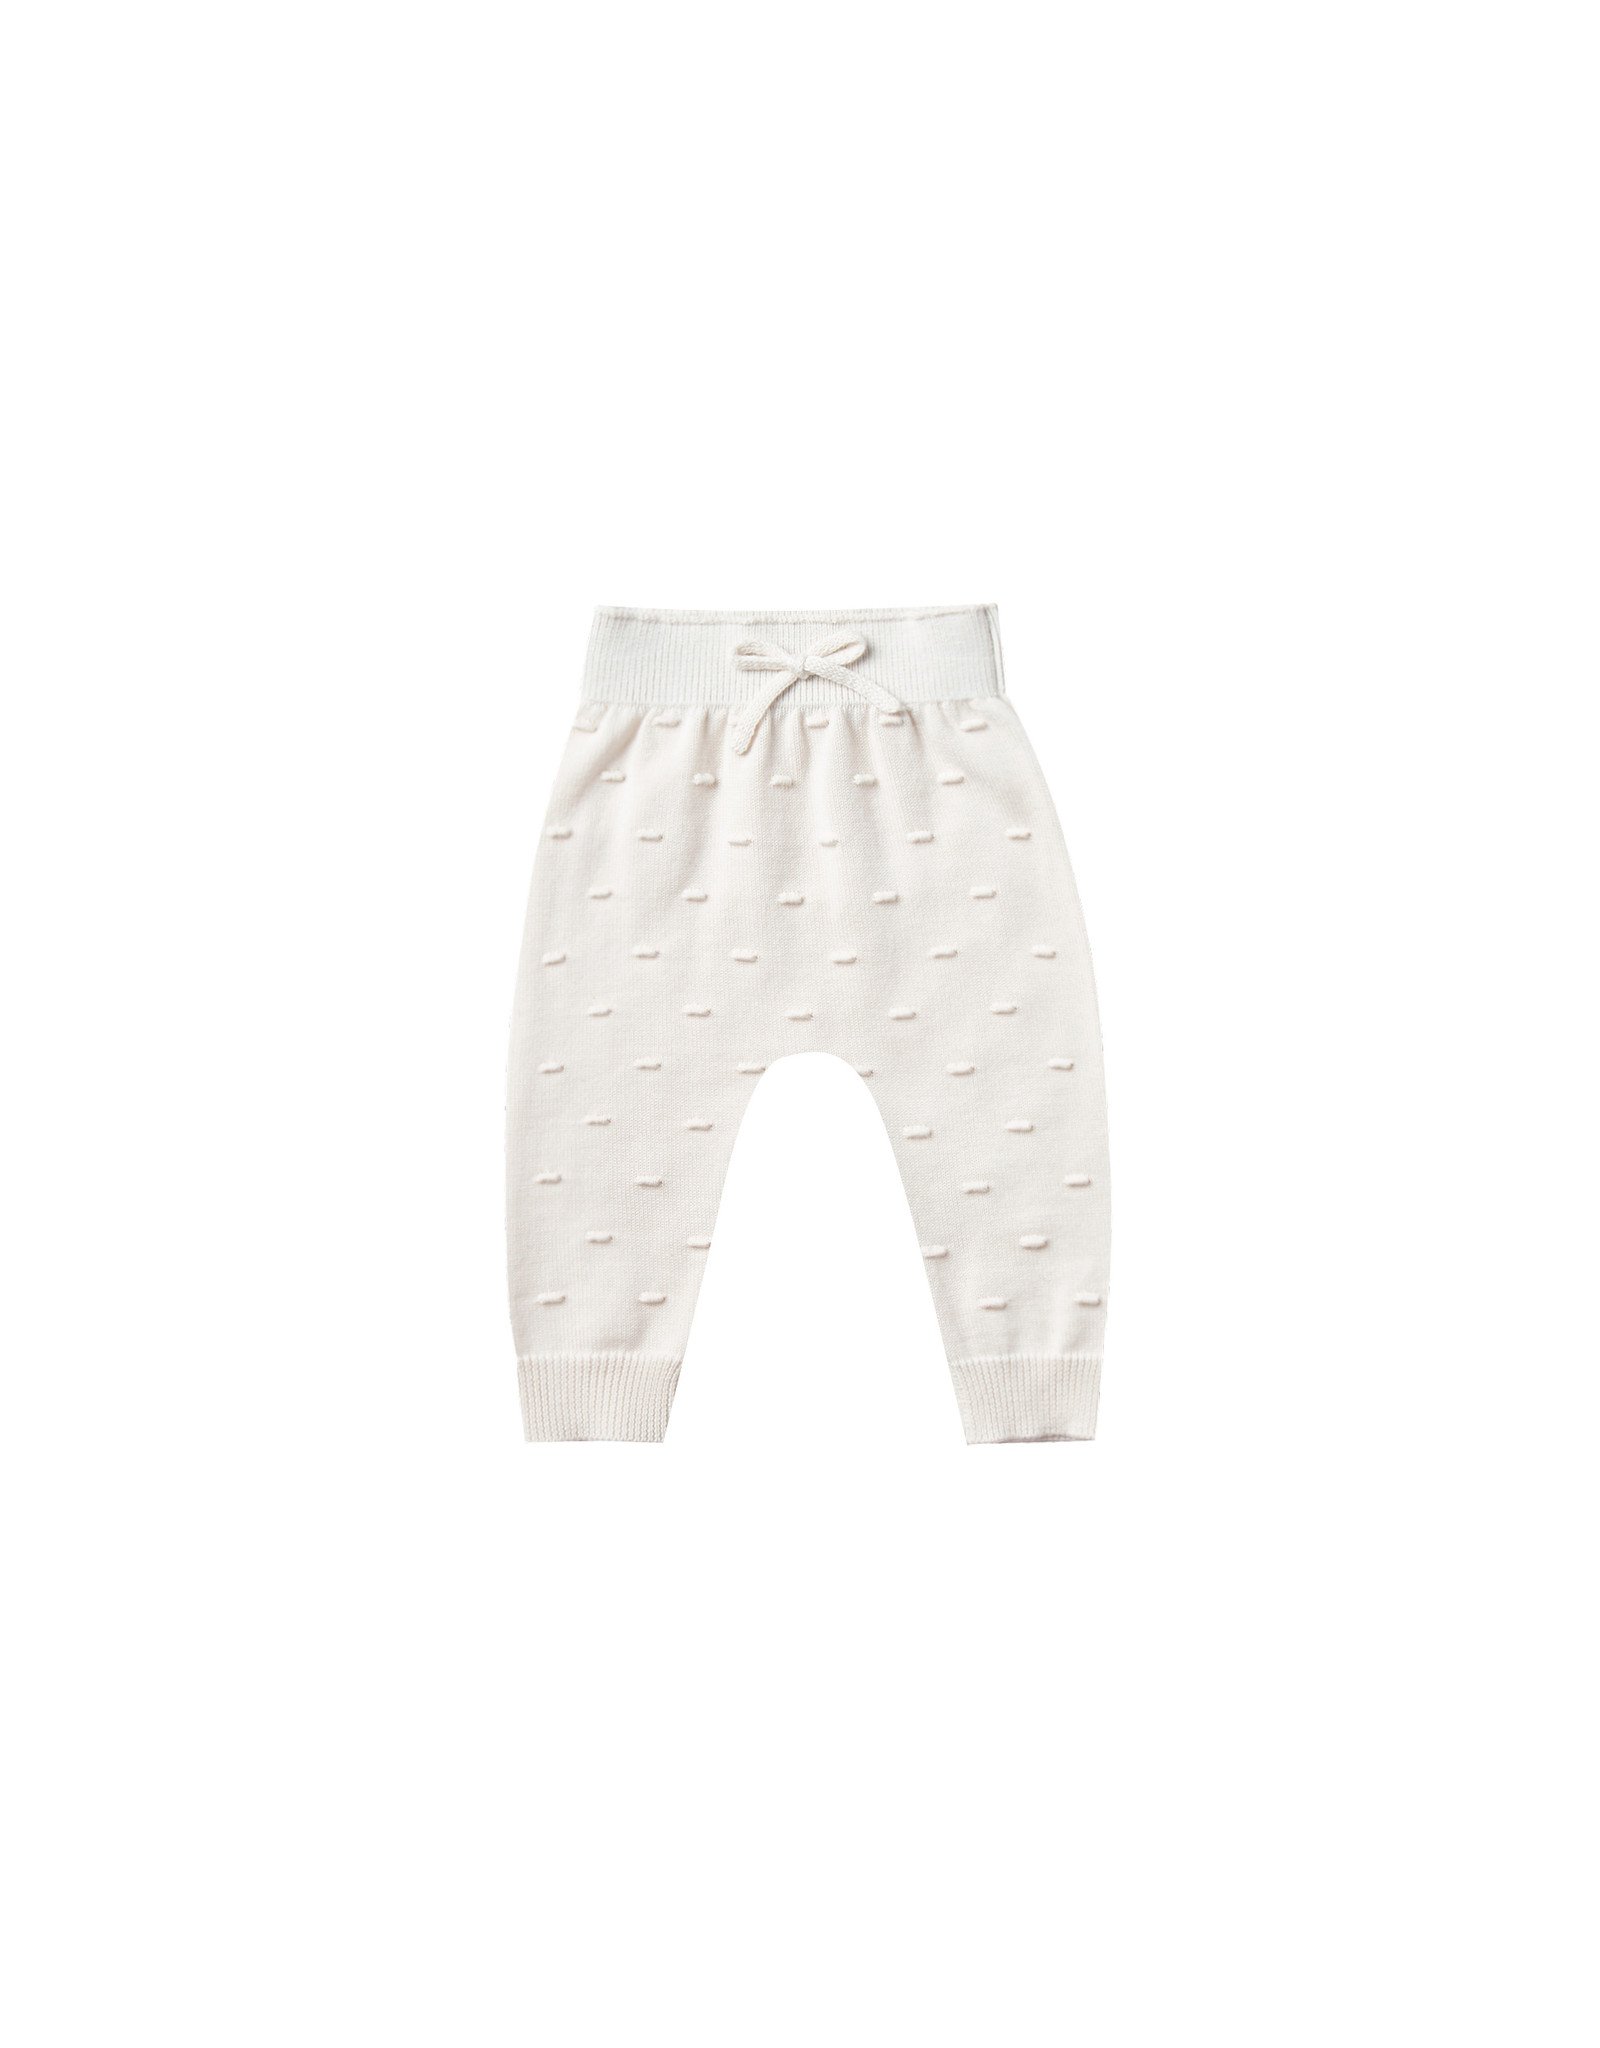 Quincy Mae Knit Pant